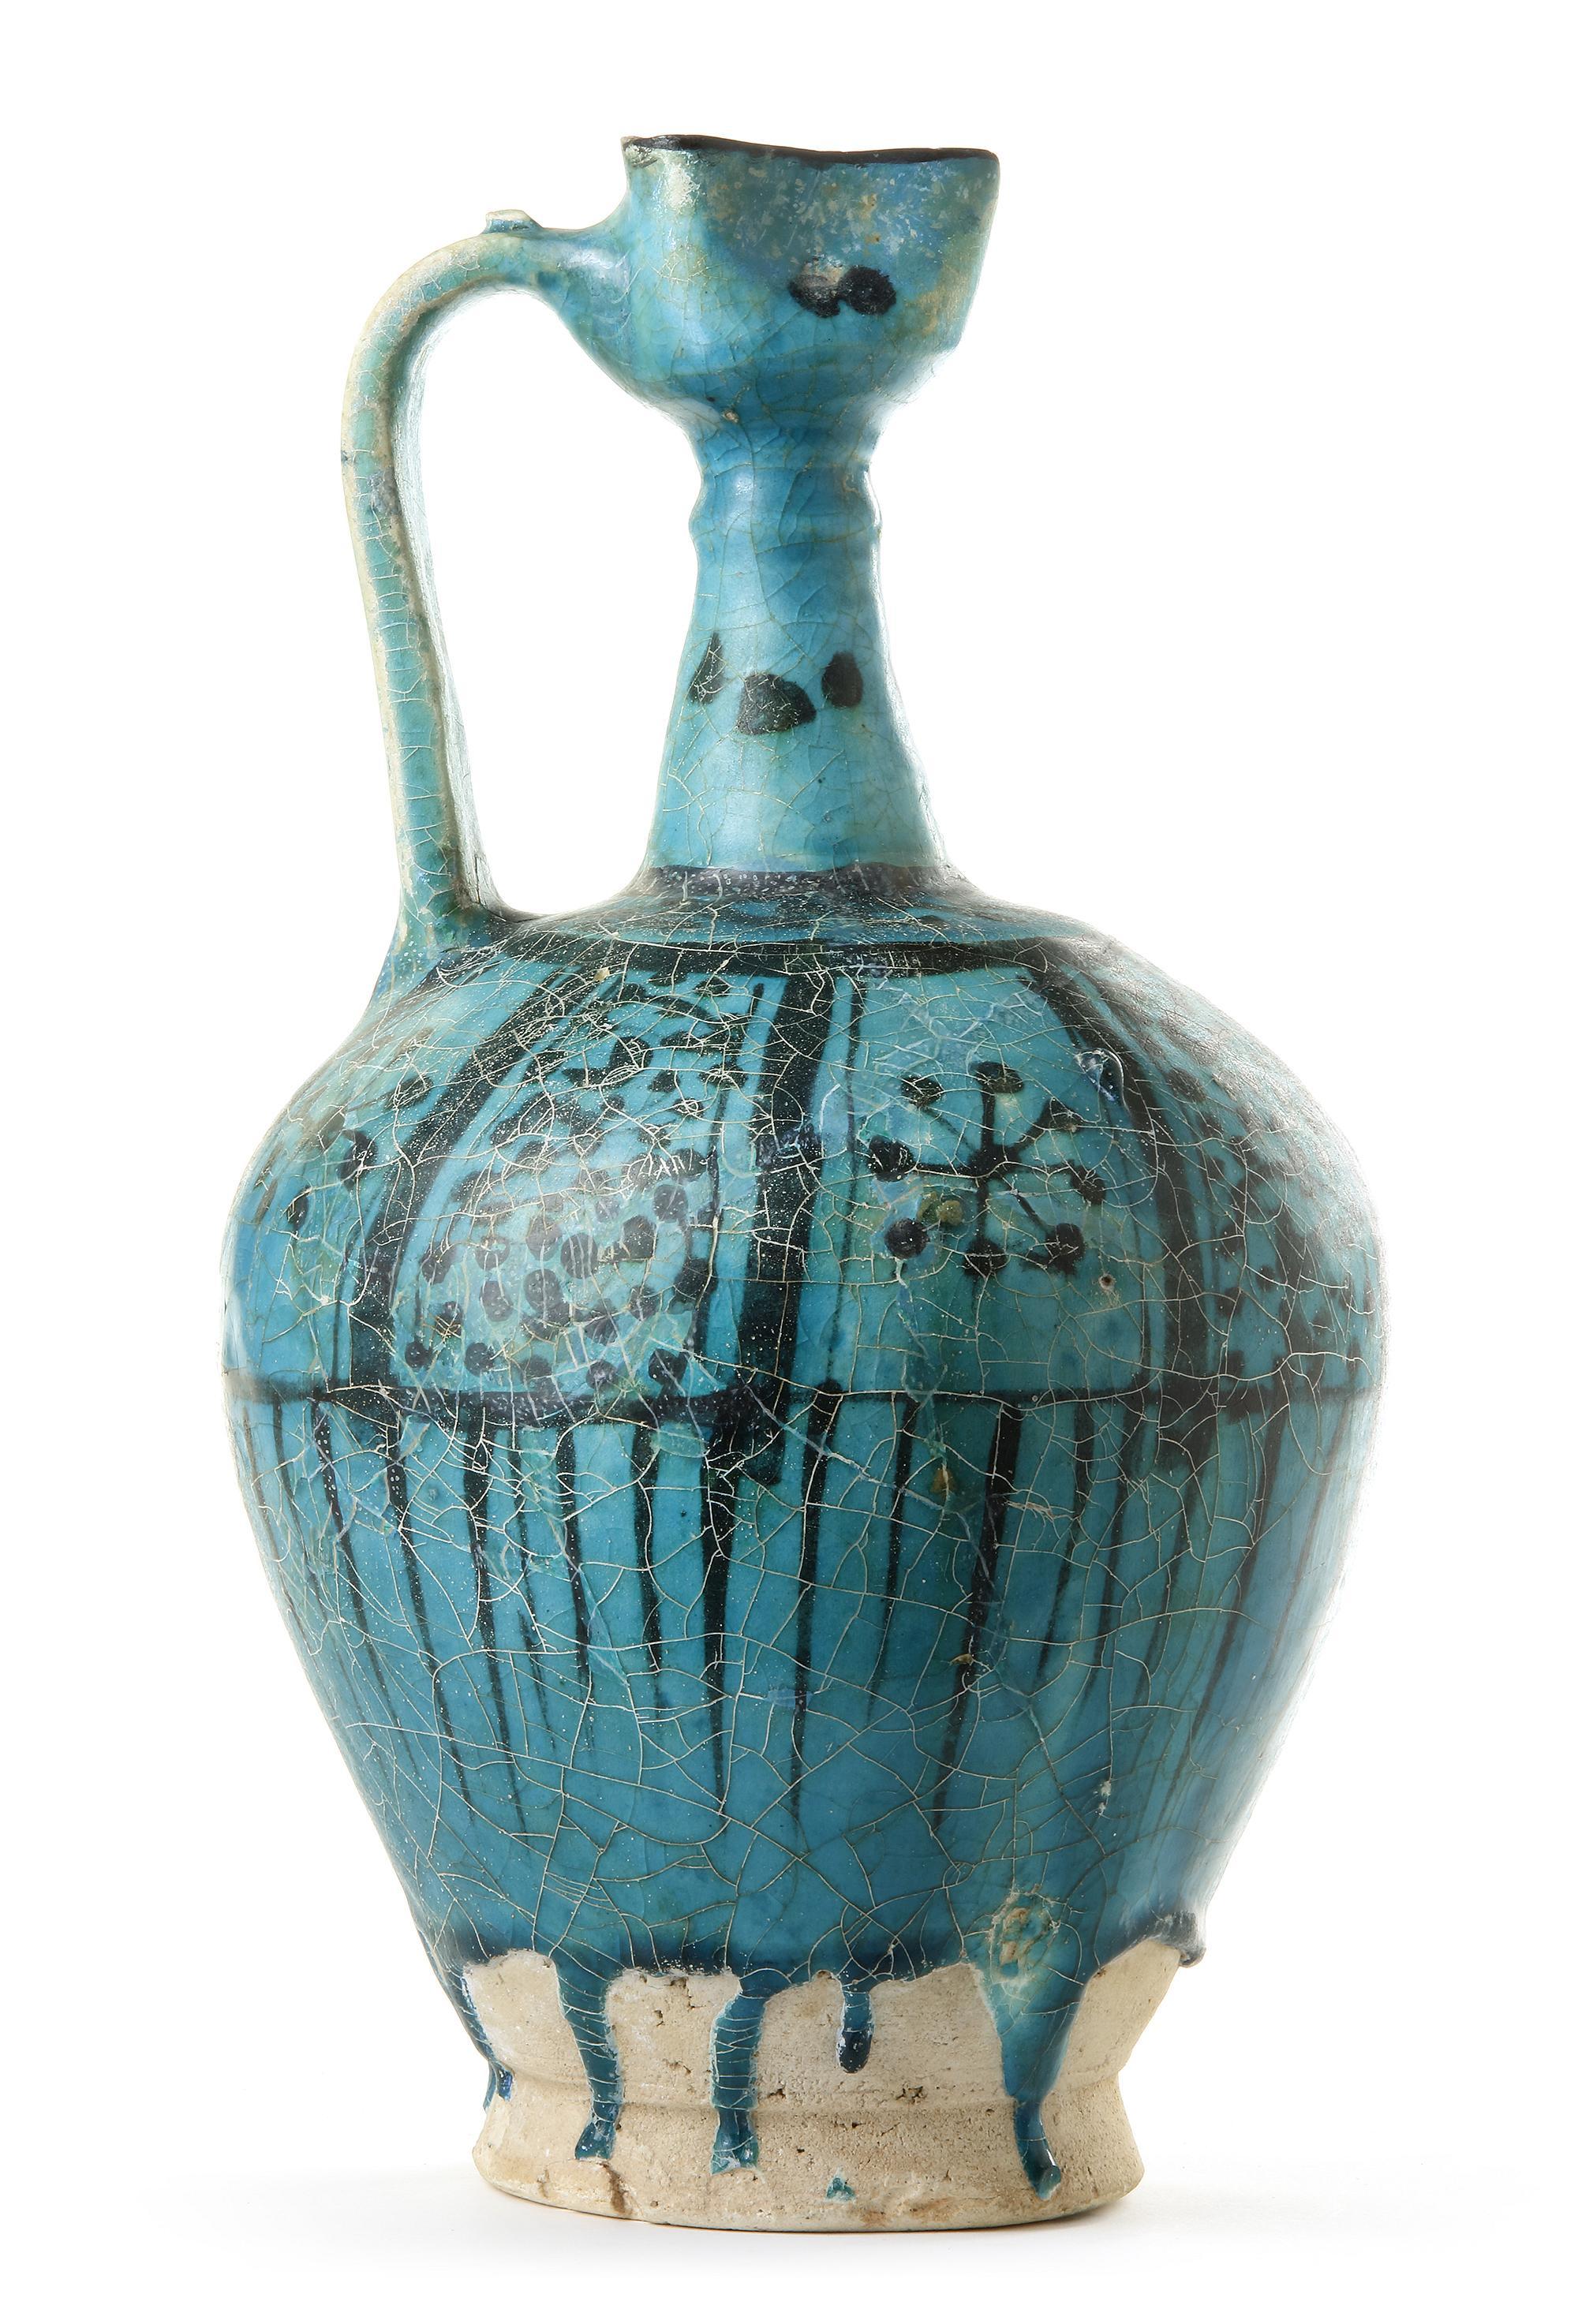 A LARGE RAQQA UNDERGLAZE PAINTED POTTERY EWER, SYRIA, 12TH-13TH CENTURY - Image 5 of 20